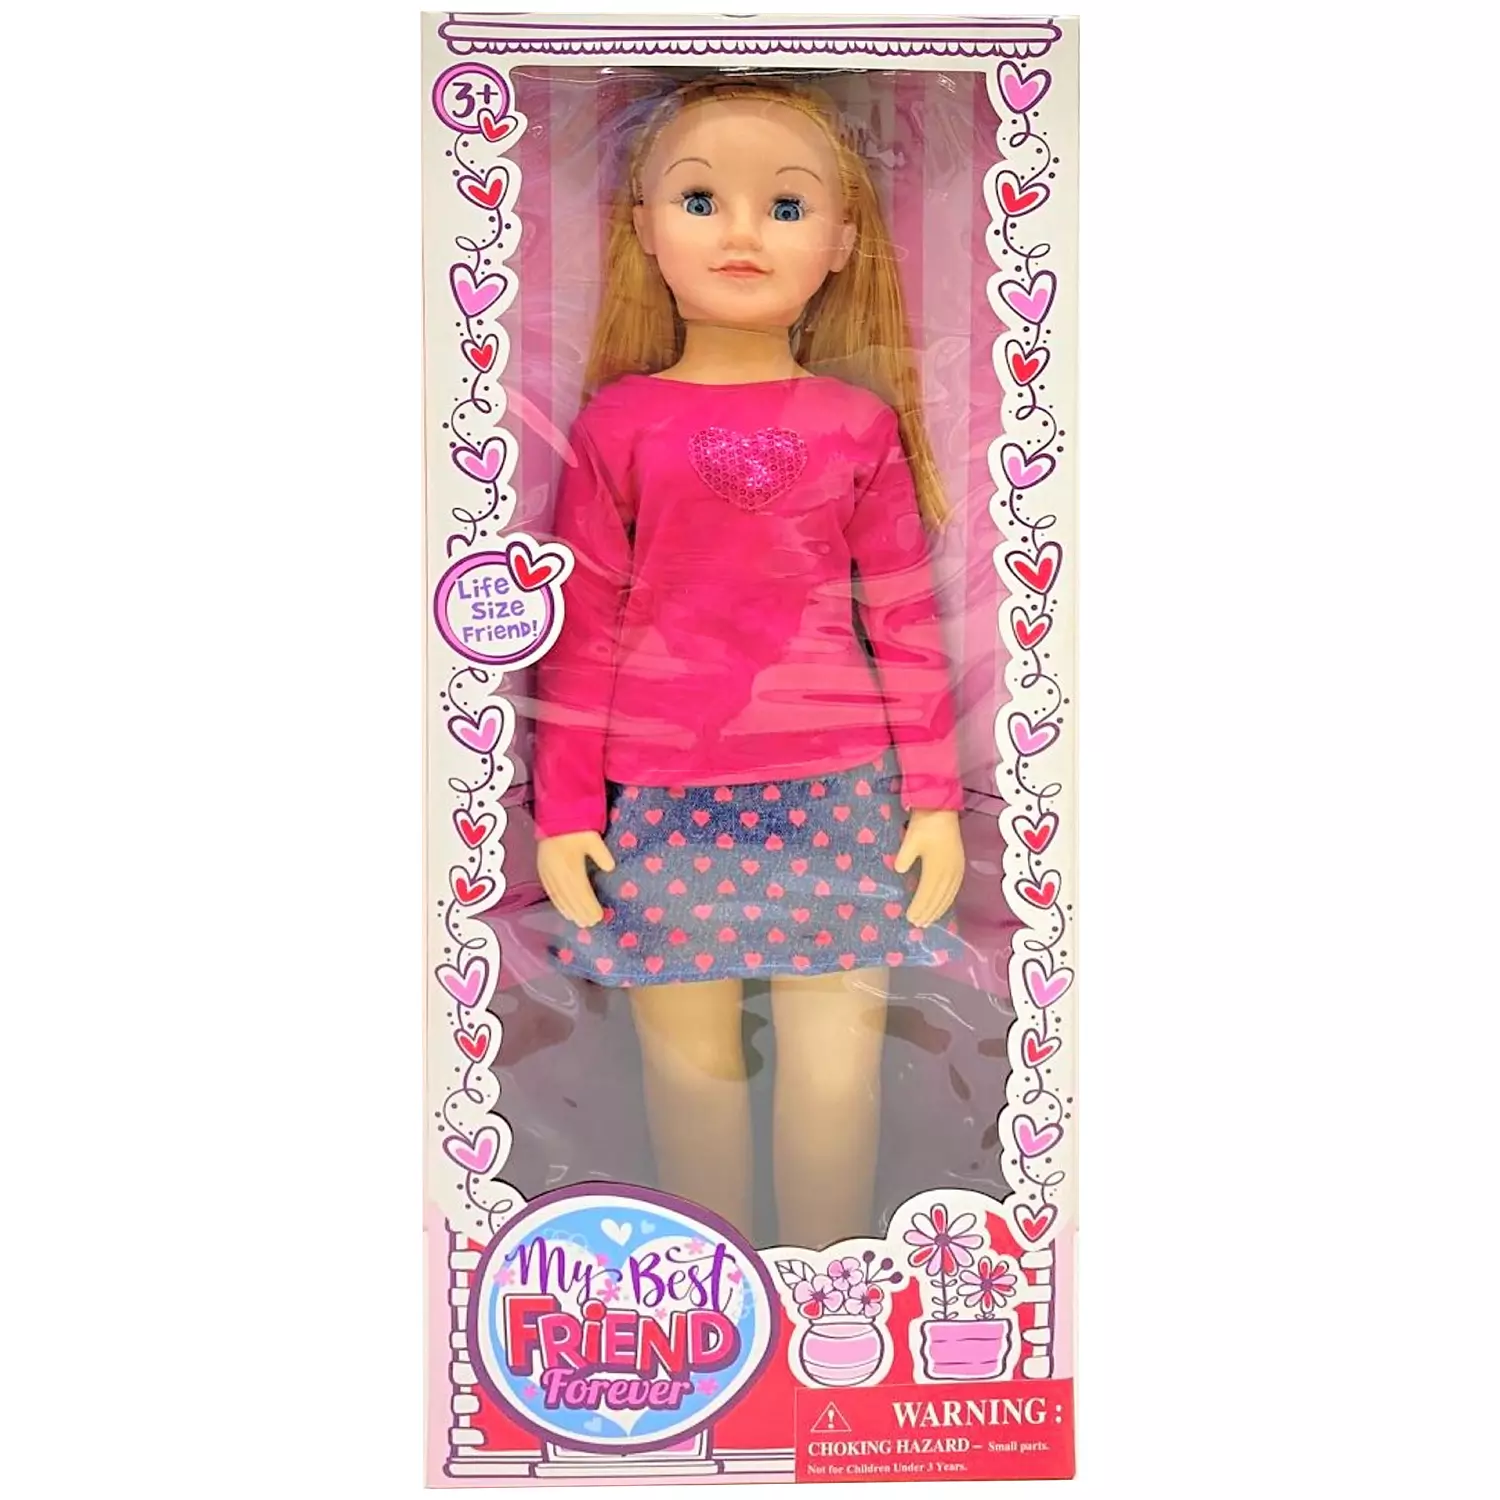 Wispy Walker - Doll, 26, pink top with skirt